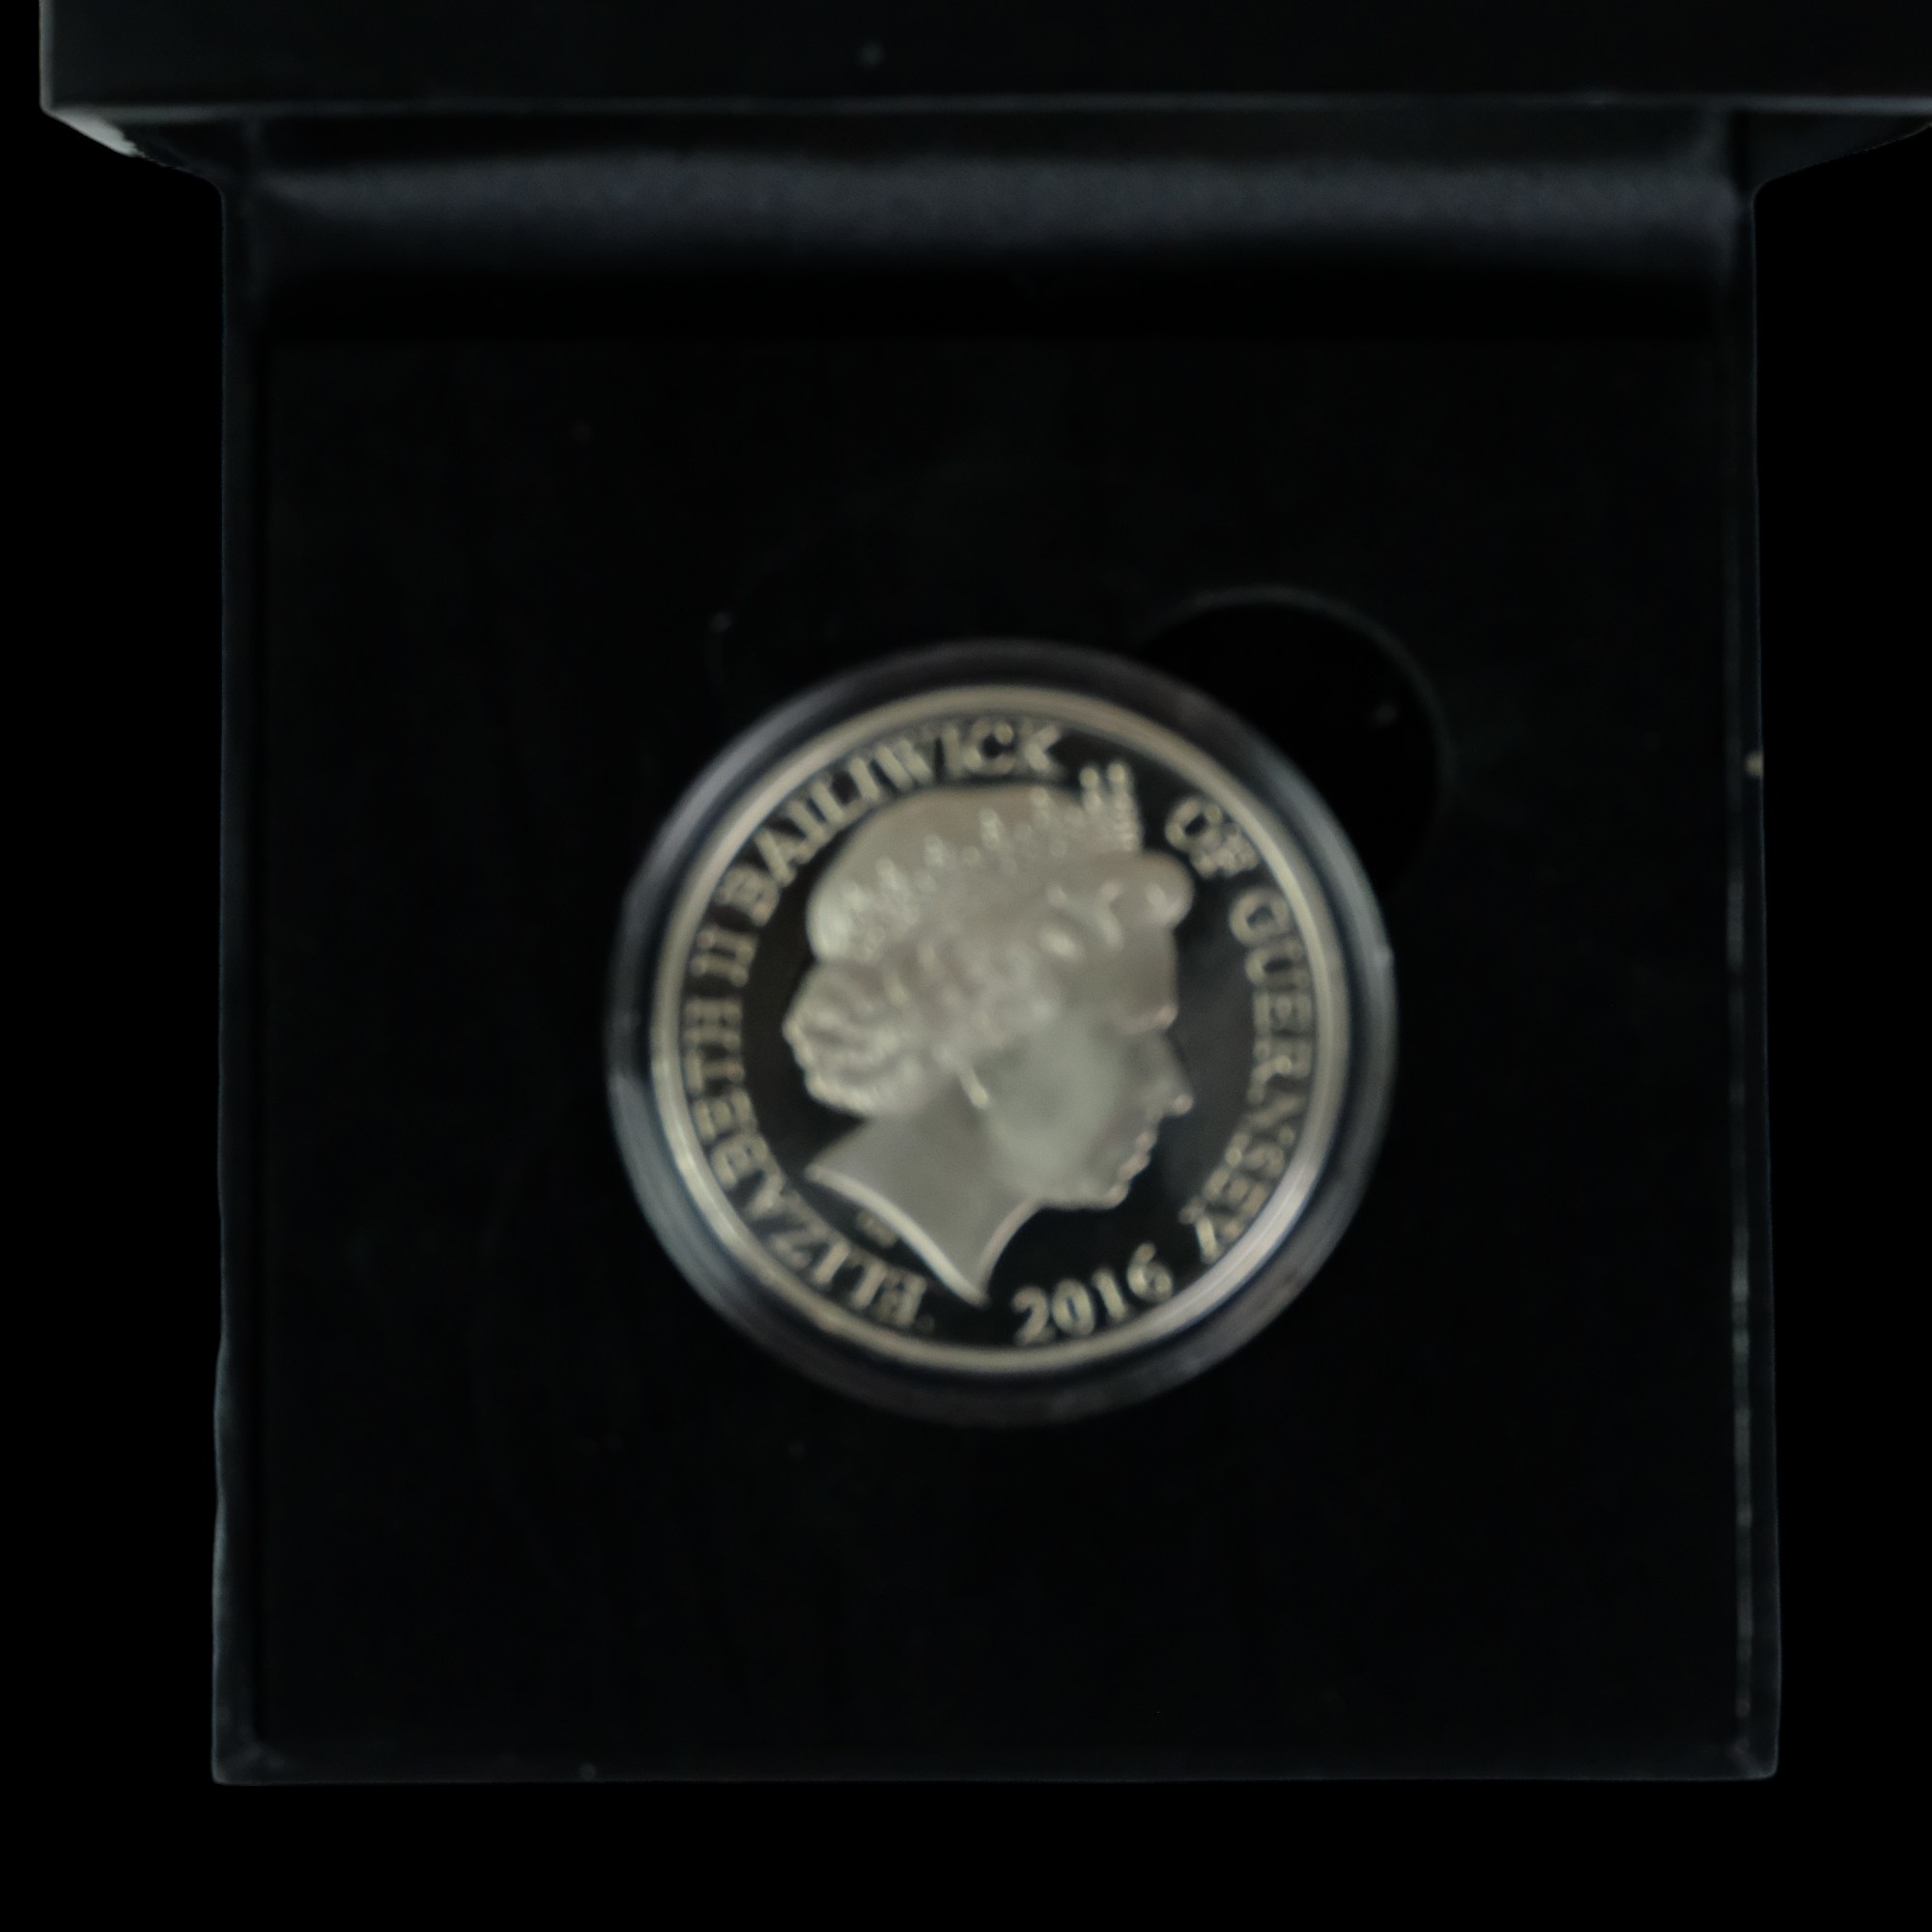 A 1993 silver proof Alderney coronation anniversary one pound coin, by The Westminster Collection, - Image 2 of 8